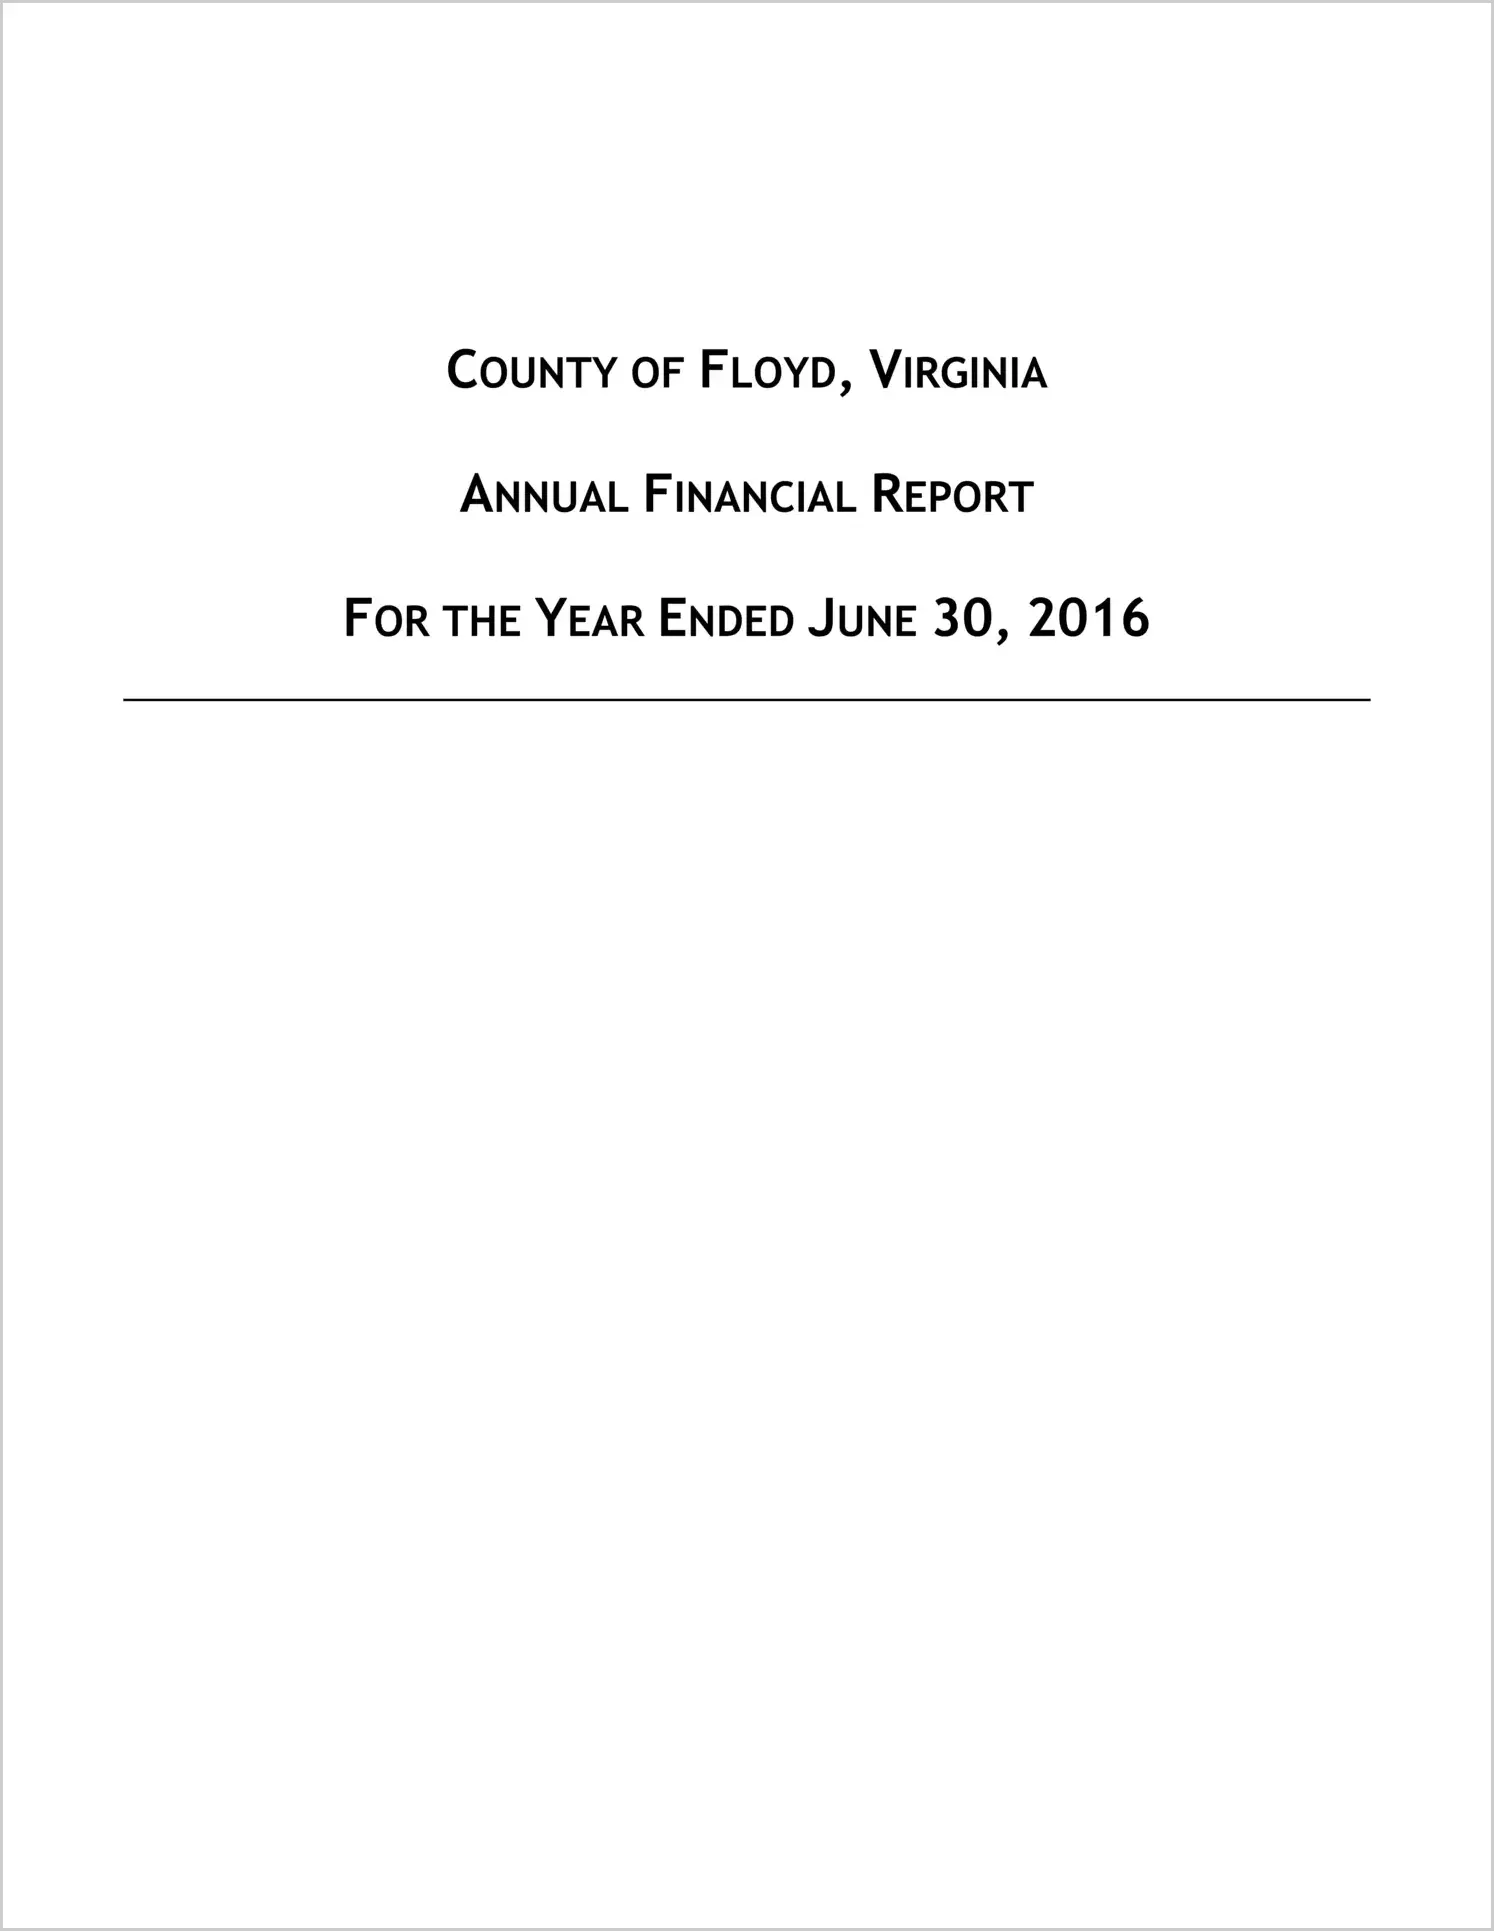 2016 Annual Financial Report for County of Floyd